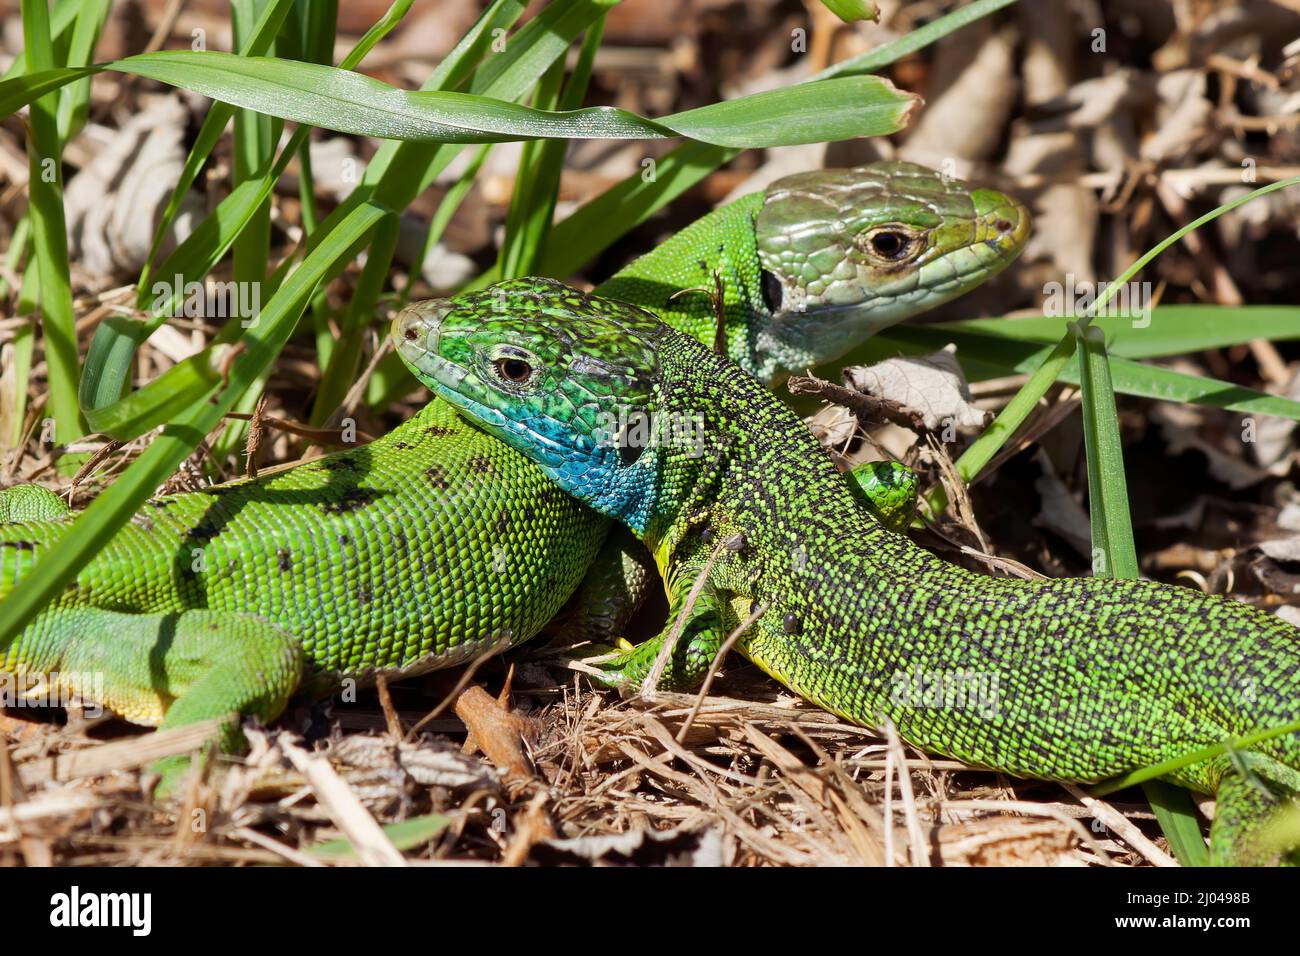 pair of beautiful black-green lizards in their home where they will reproduce. Wonders of nature. Stock Photo